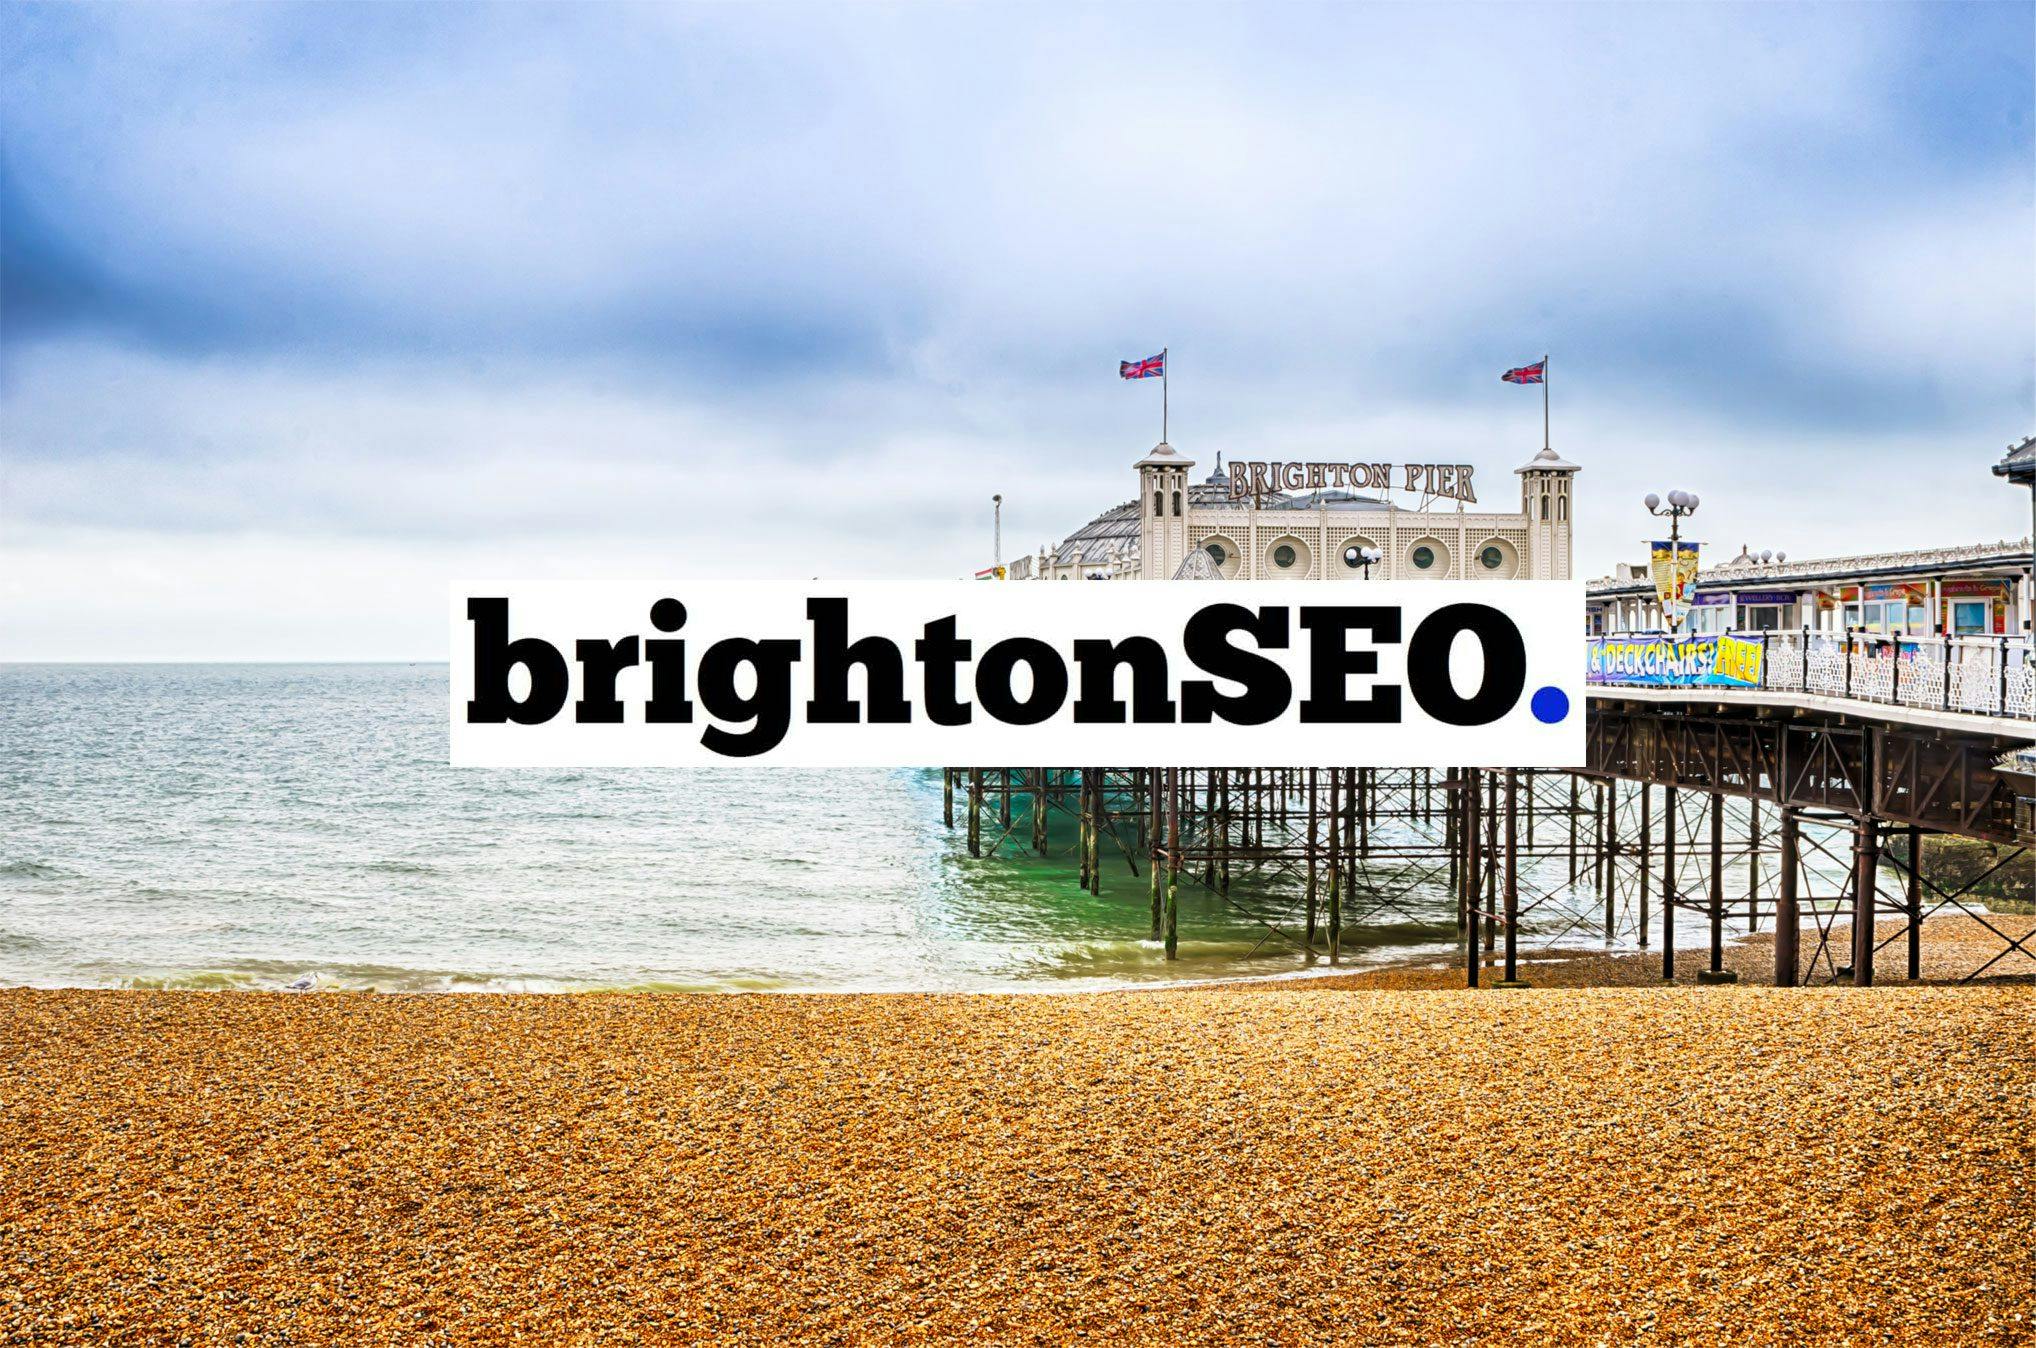 Bobbi Brant at BrightonSEO: How to Use Live Video in Content Marketing